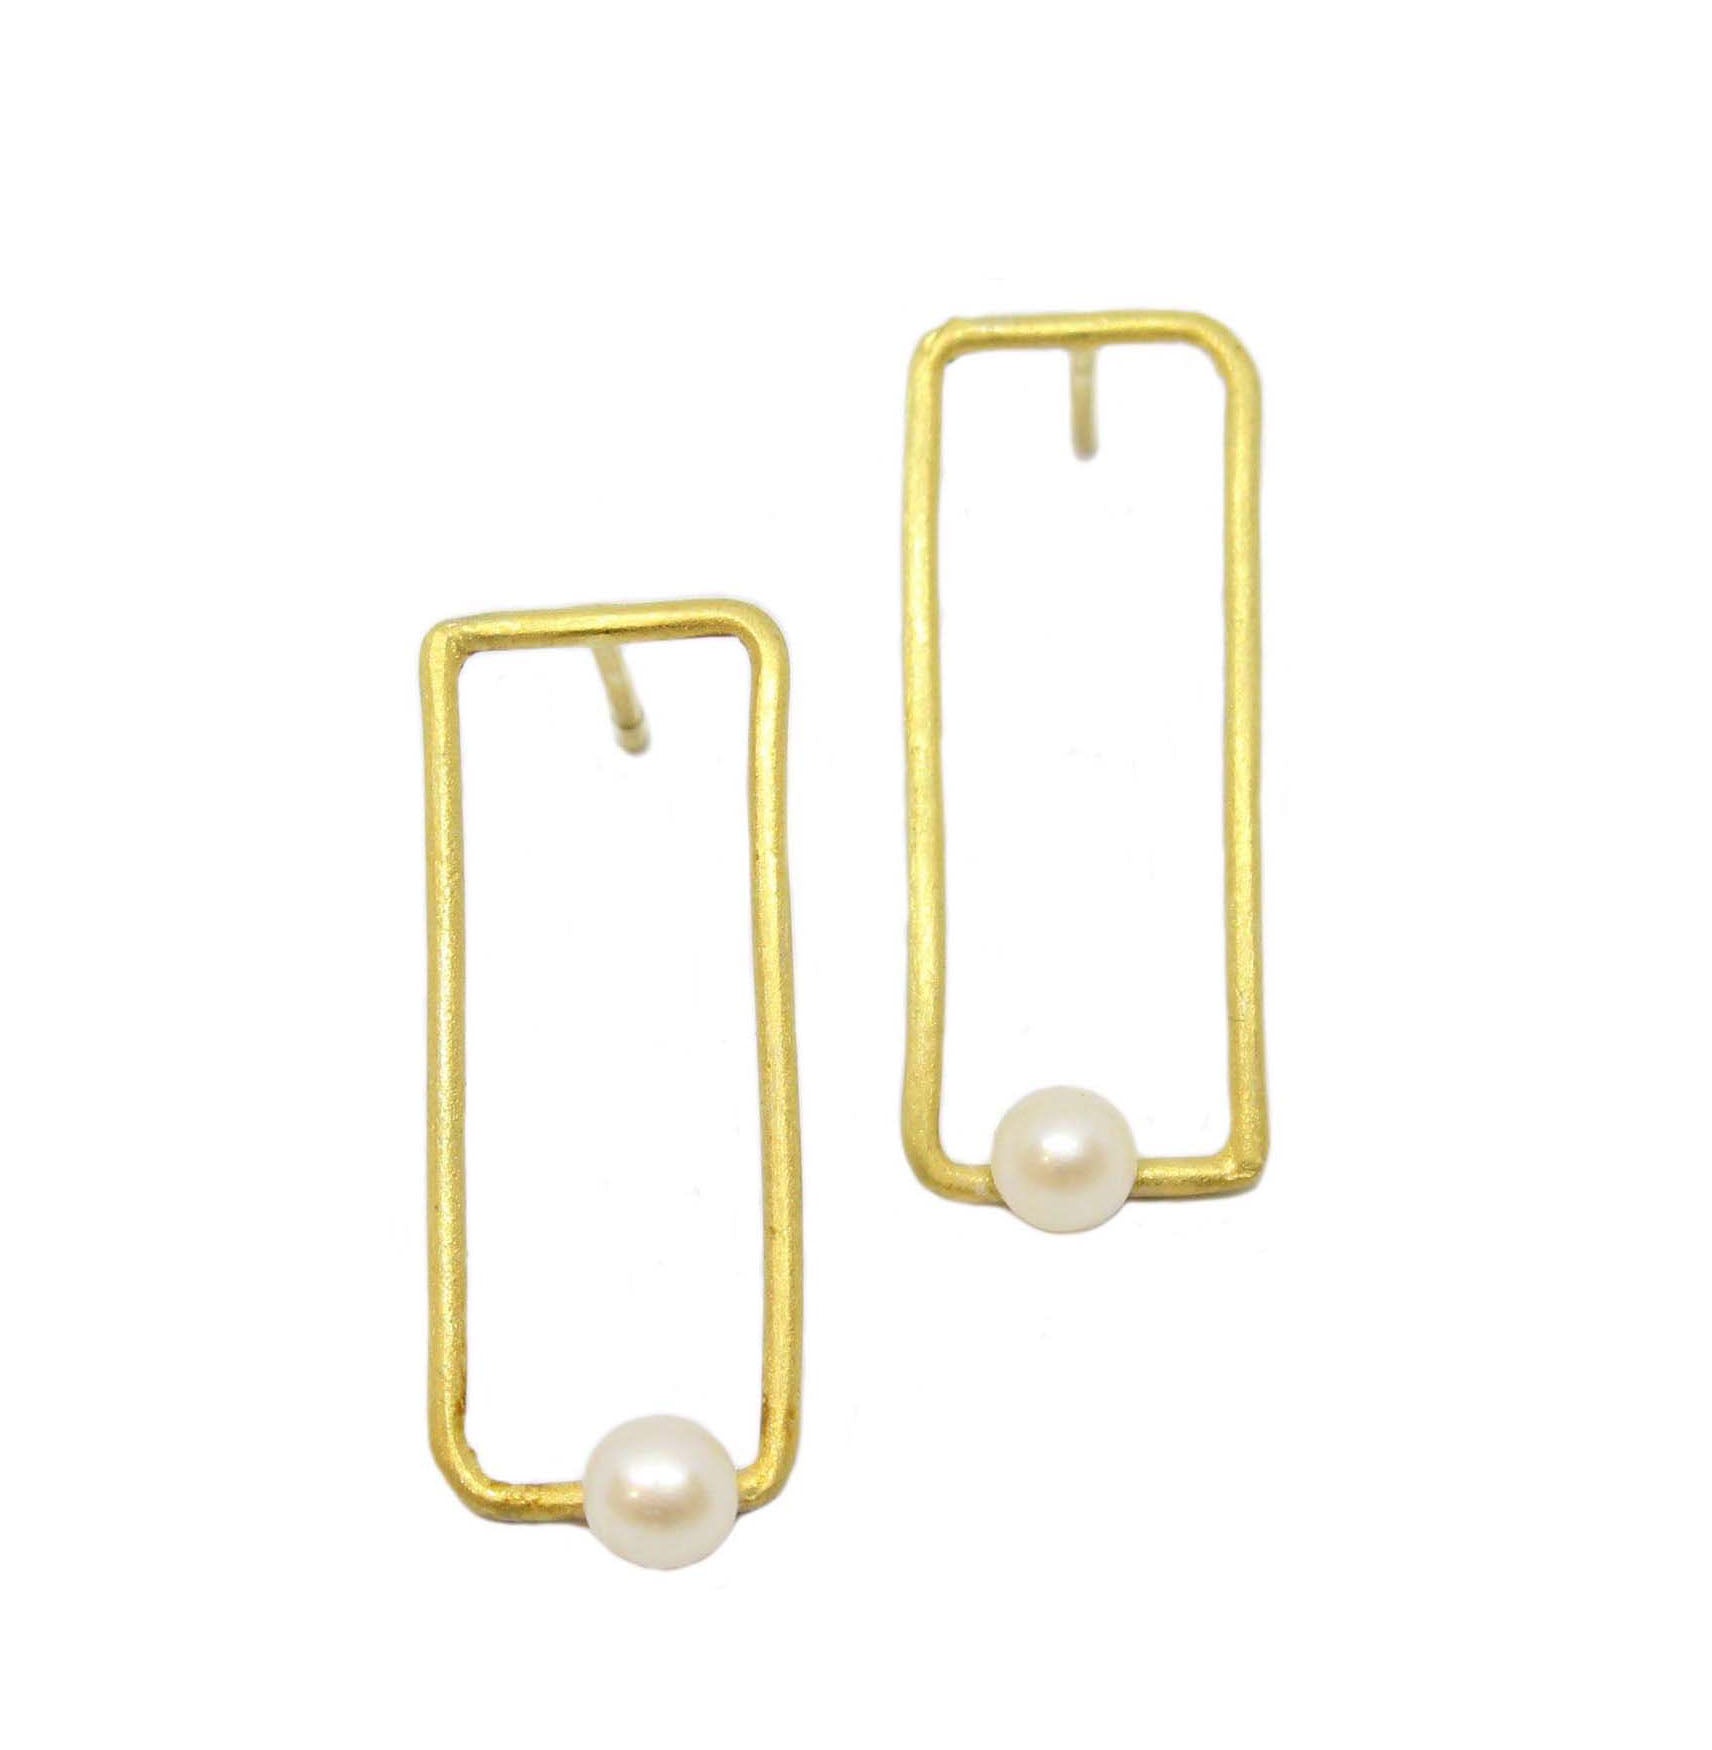 Simplicity Rectangles with Pearls Gold-Plated Earrings